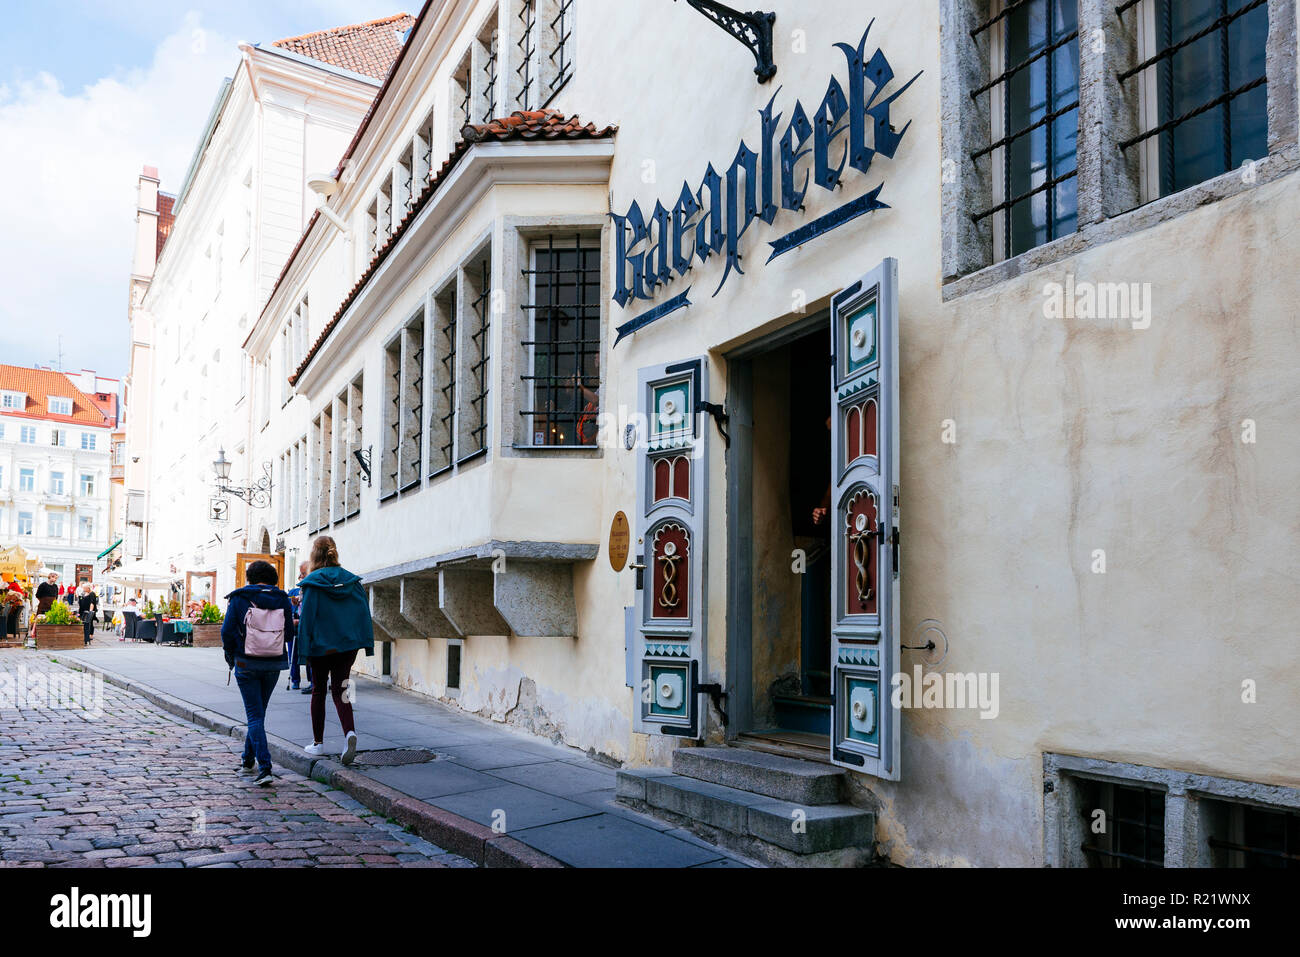 The Raeapteek, Town Hall Pharmacy, is one of the oldest continuously running pharmacies in Europe, having always been in business in the same house si Stock Photo